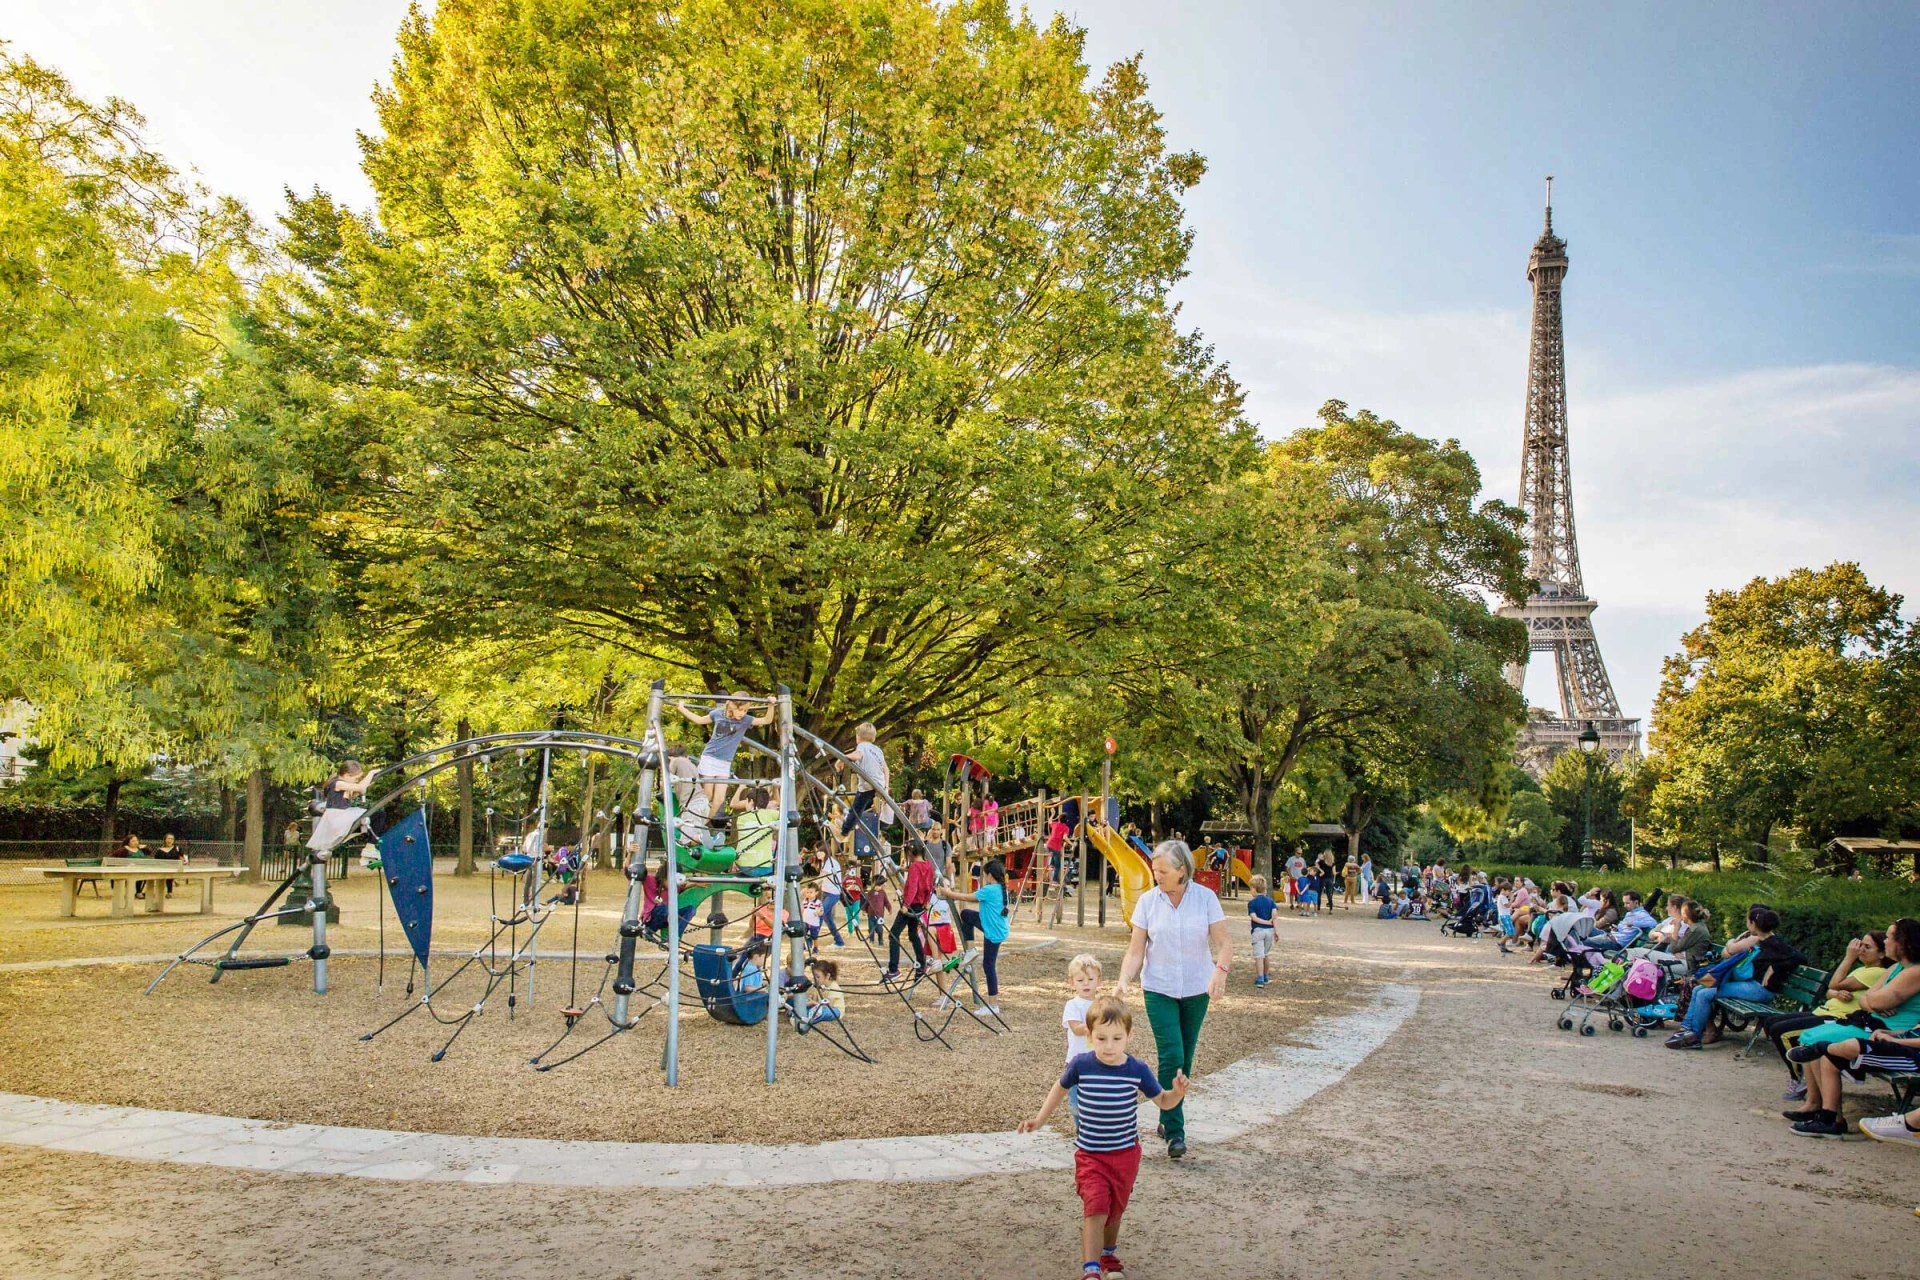 Children and parents at a KOMPAN playground by the Eiffel Tower